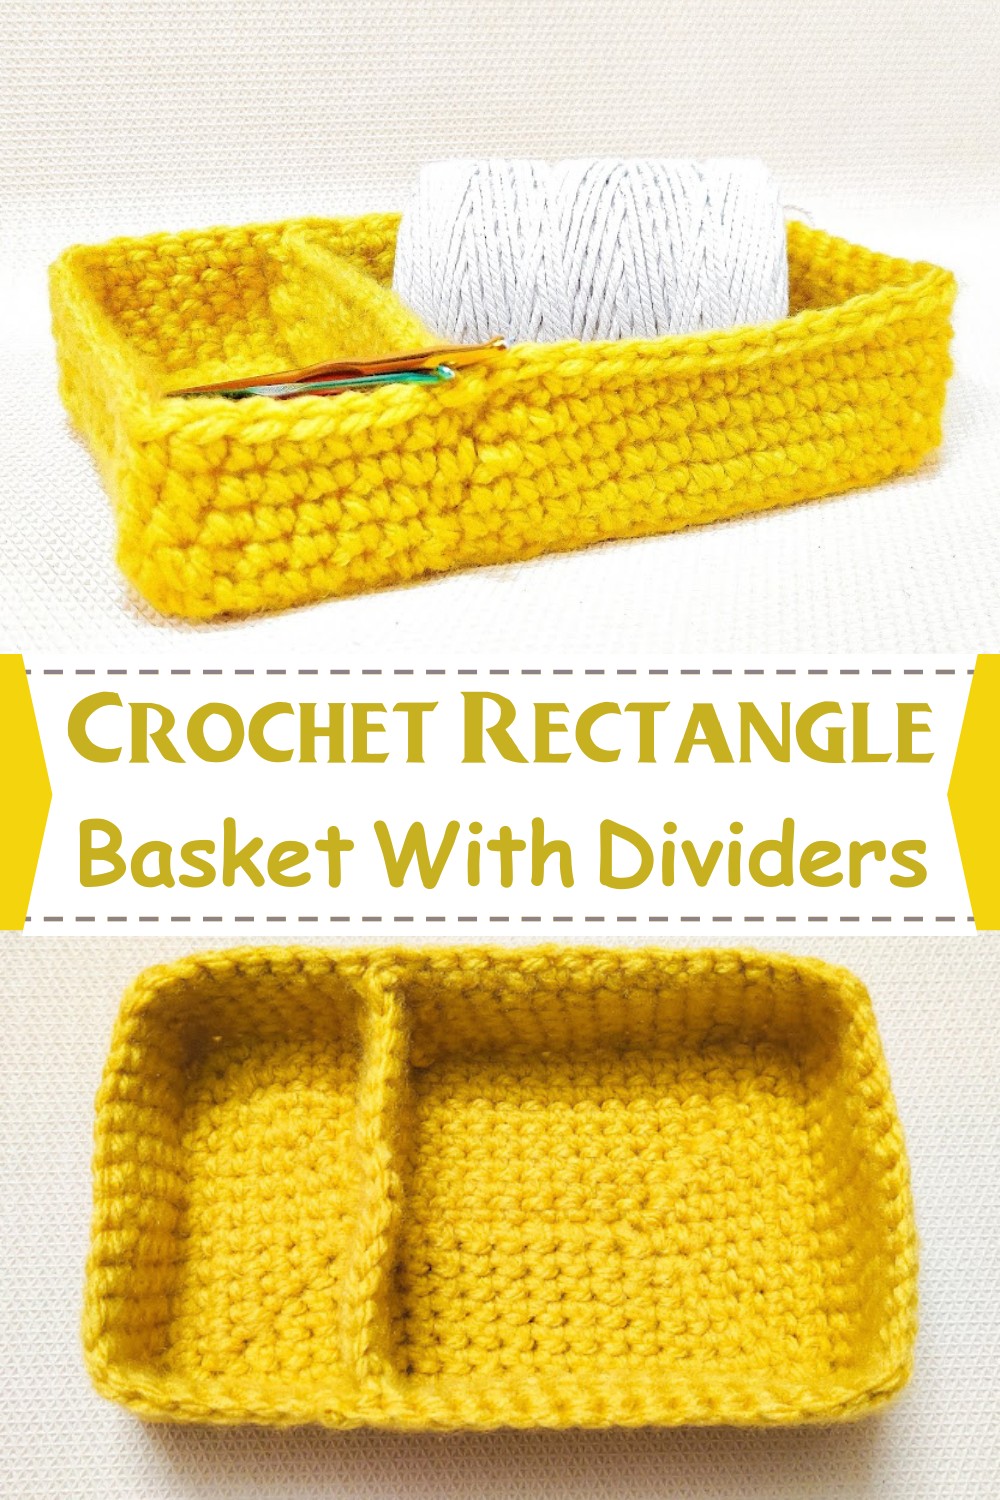 Crochet Rectangle Basket With Dividers